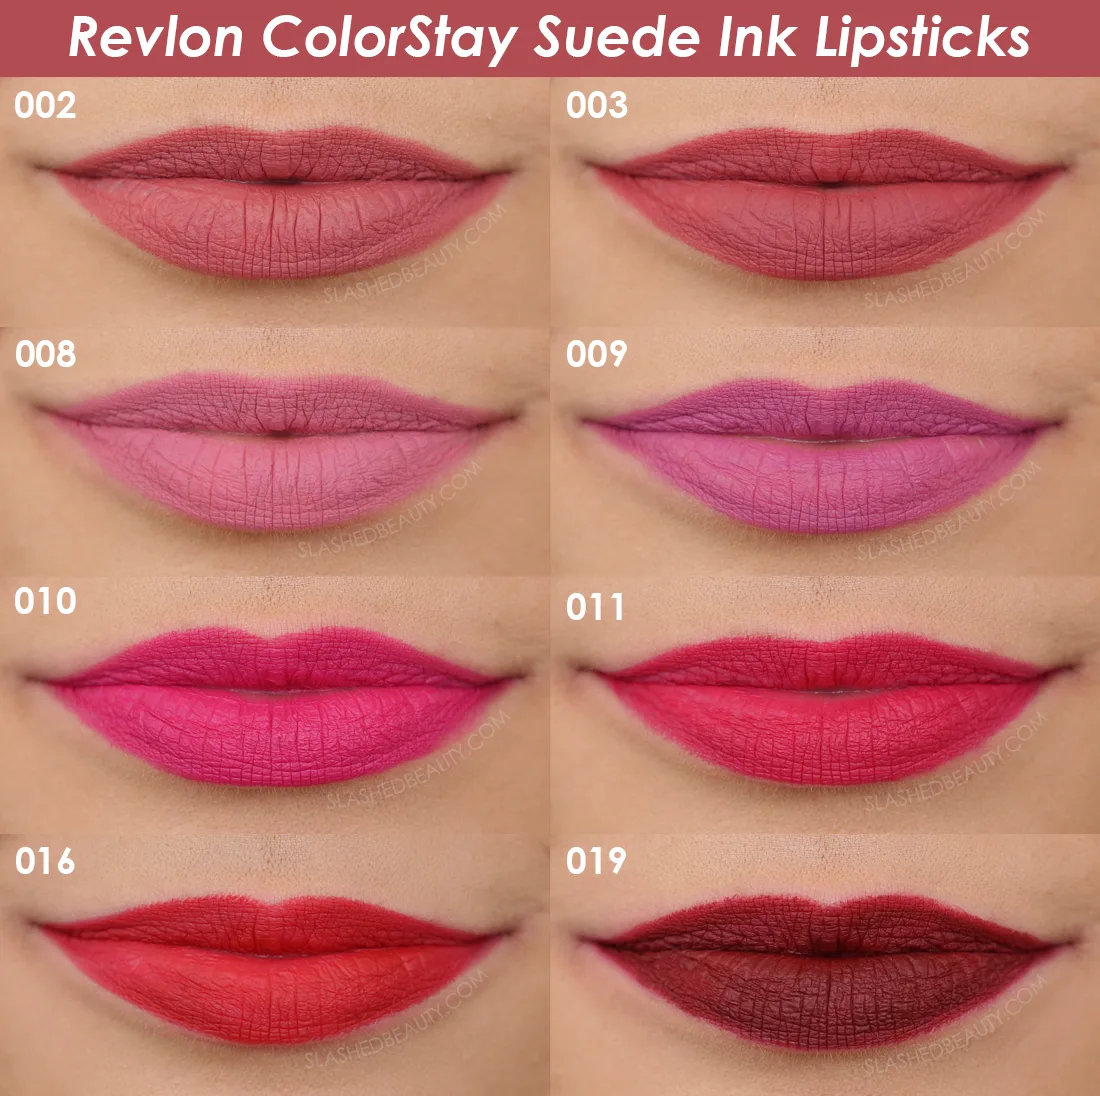 Revlon ColorStay Suede Ink Lipstick Swatches | Slashed Beauty